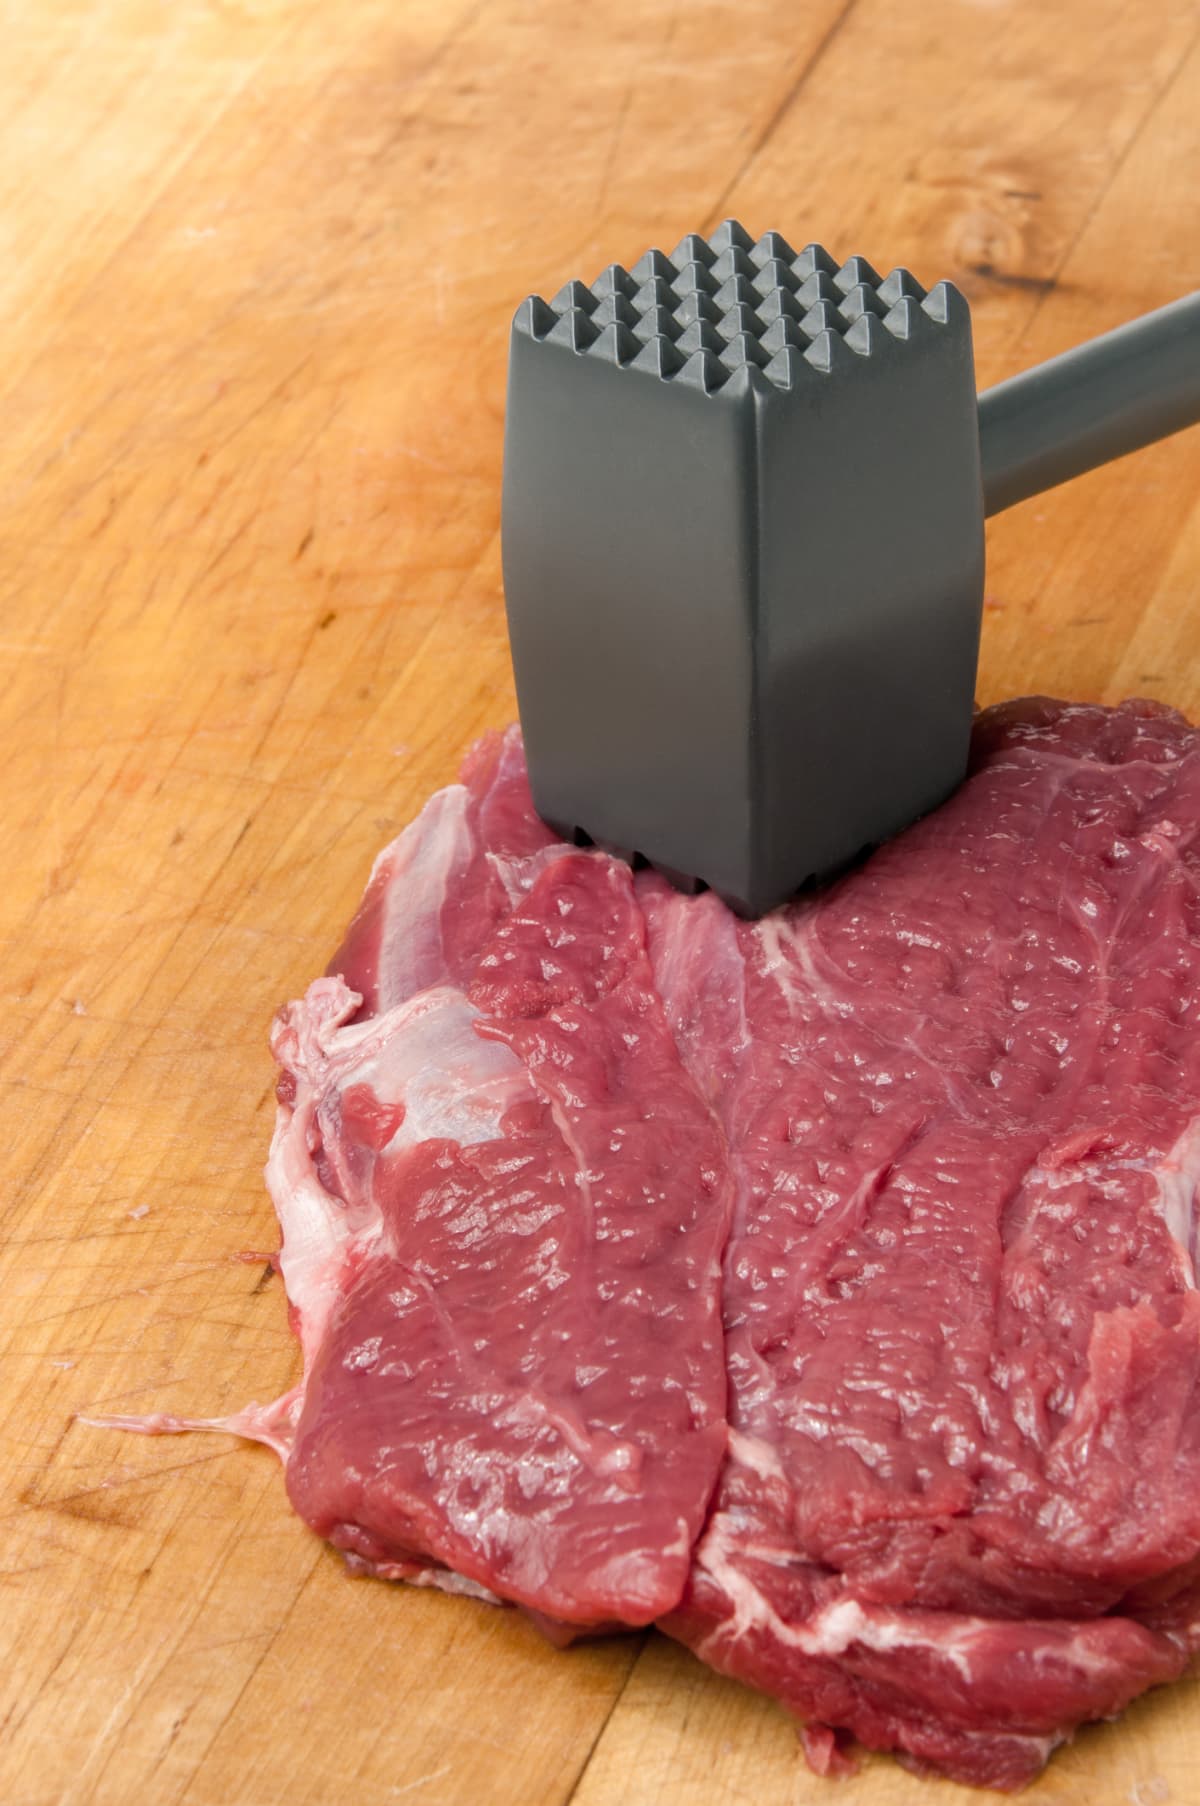 Meat being tenderized with metal meat mallet